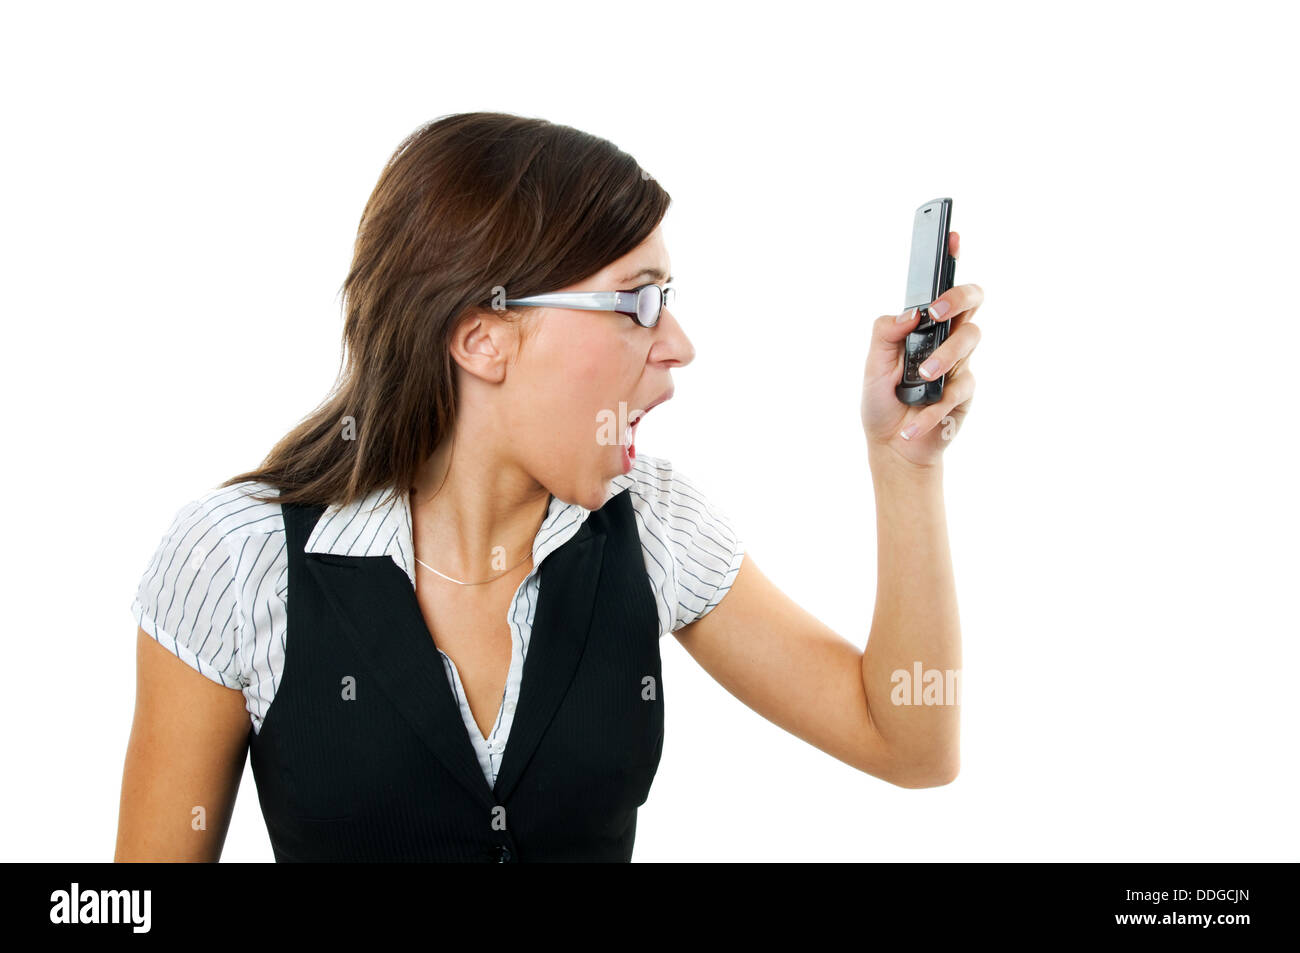 Angry woman shouting at her mobile phone Stock Photo